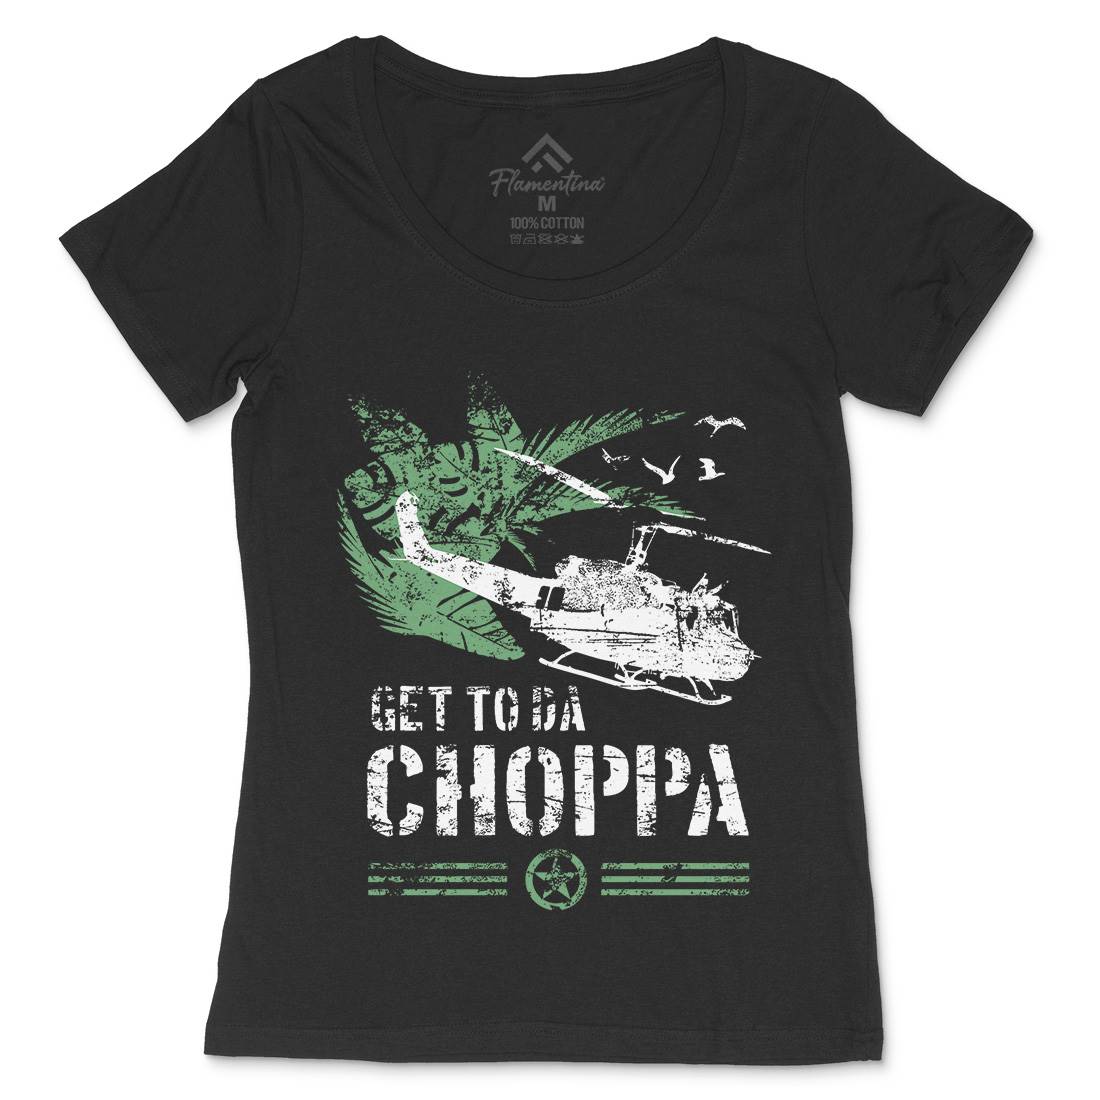 Get To The Chopper Womens Scoop Neck T-Shirt Army D235